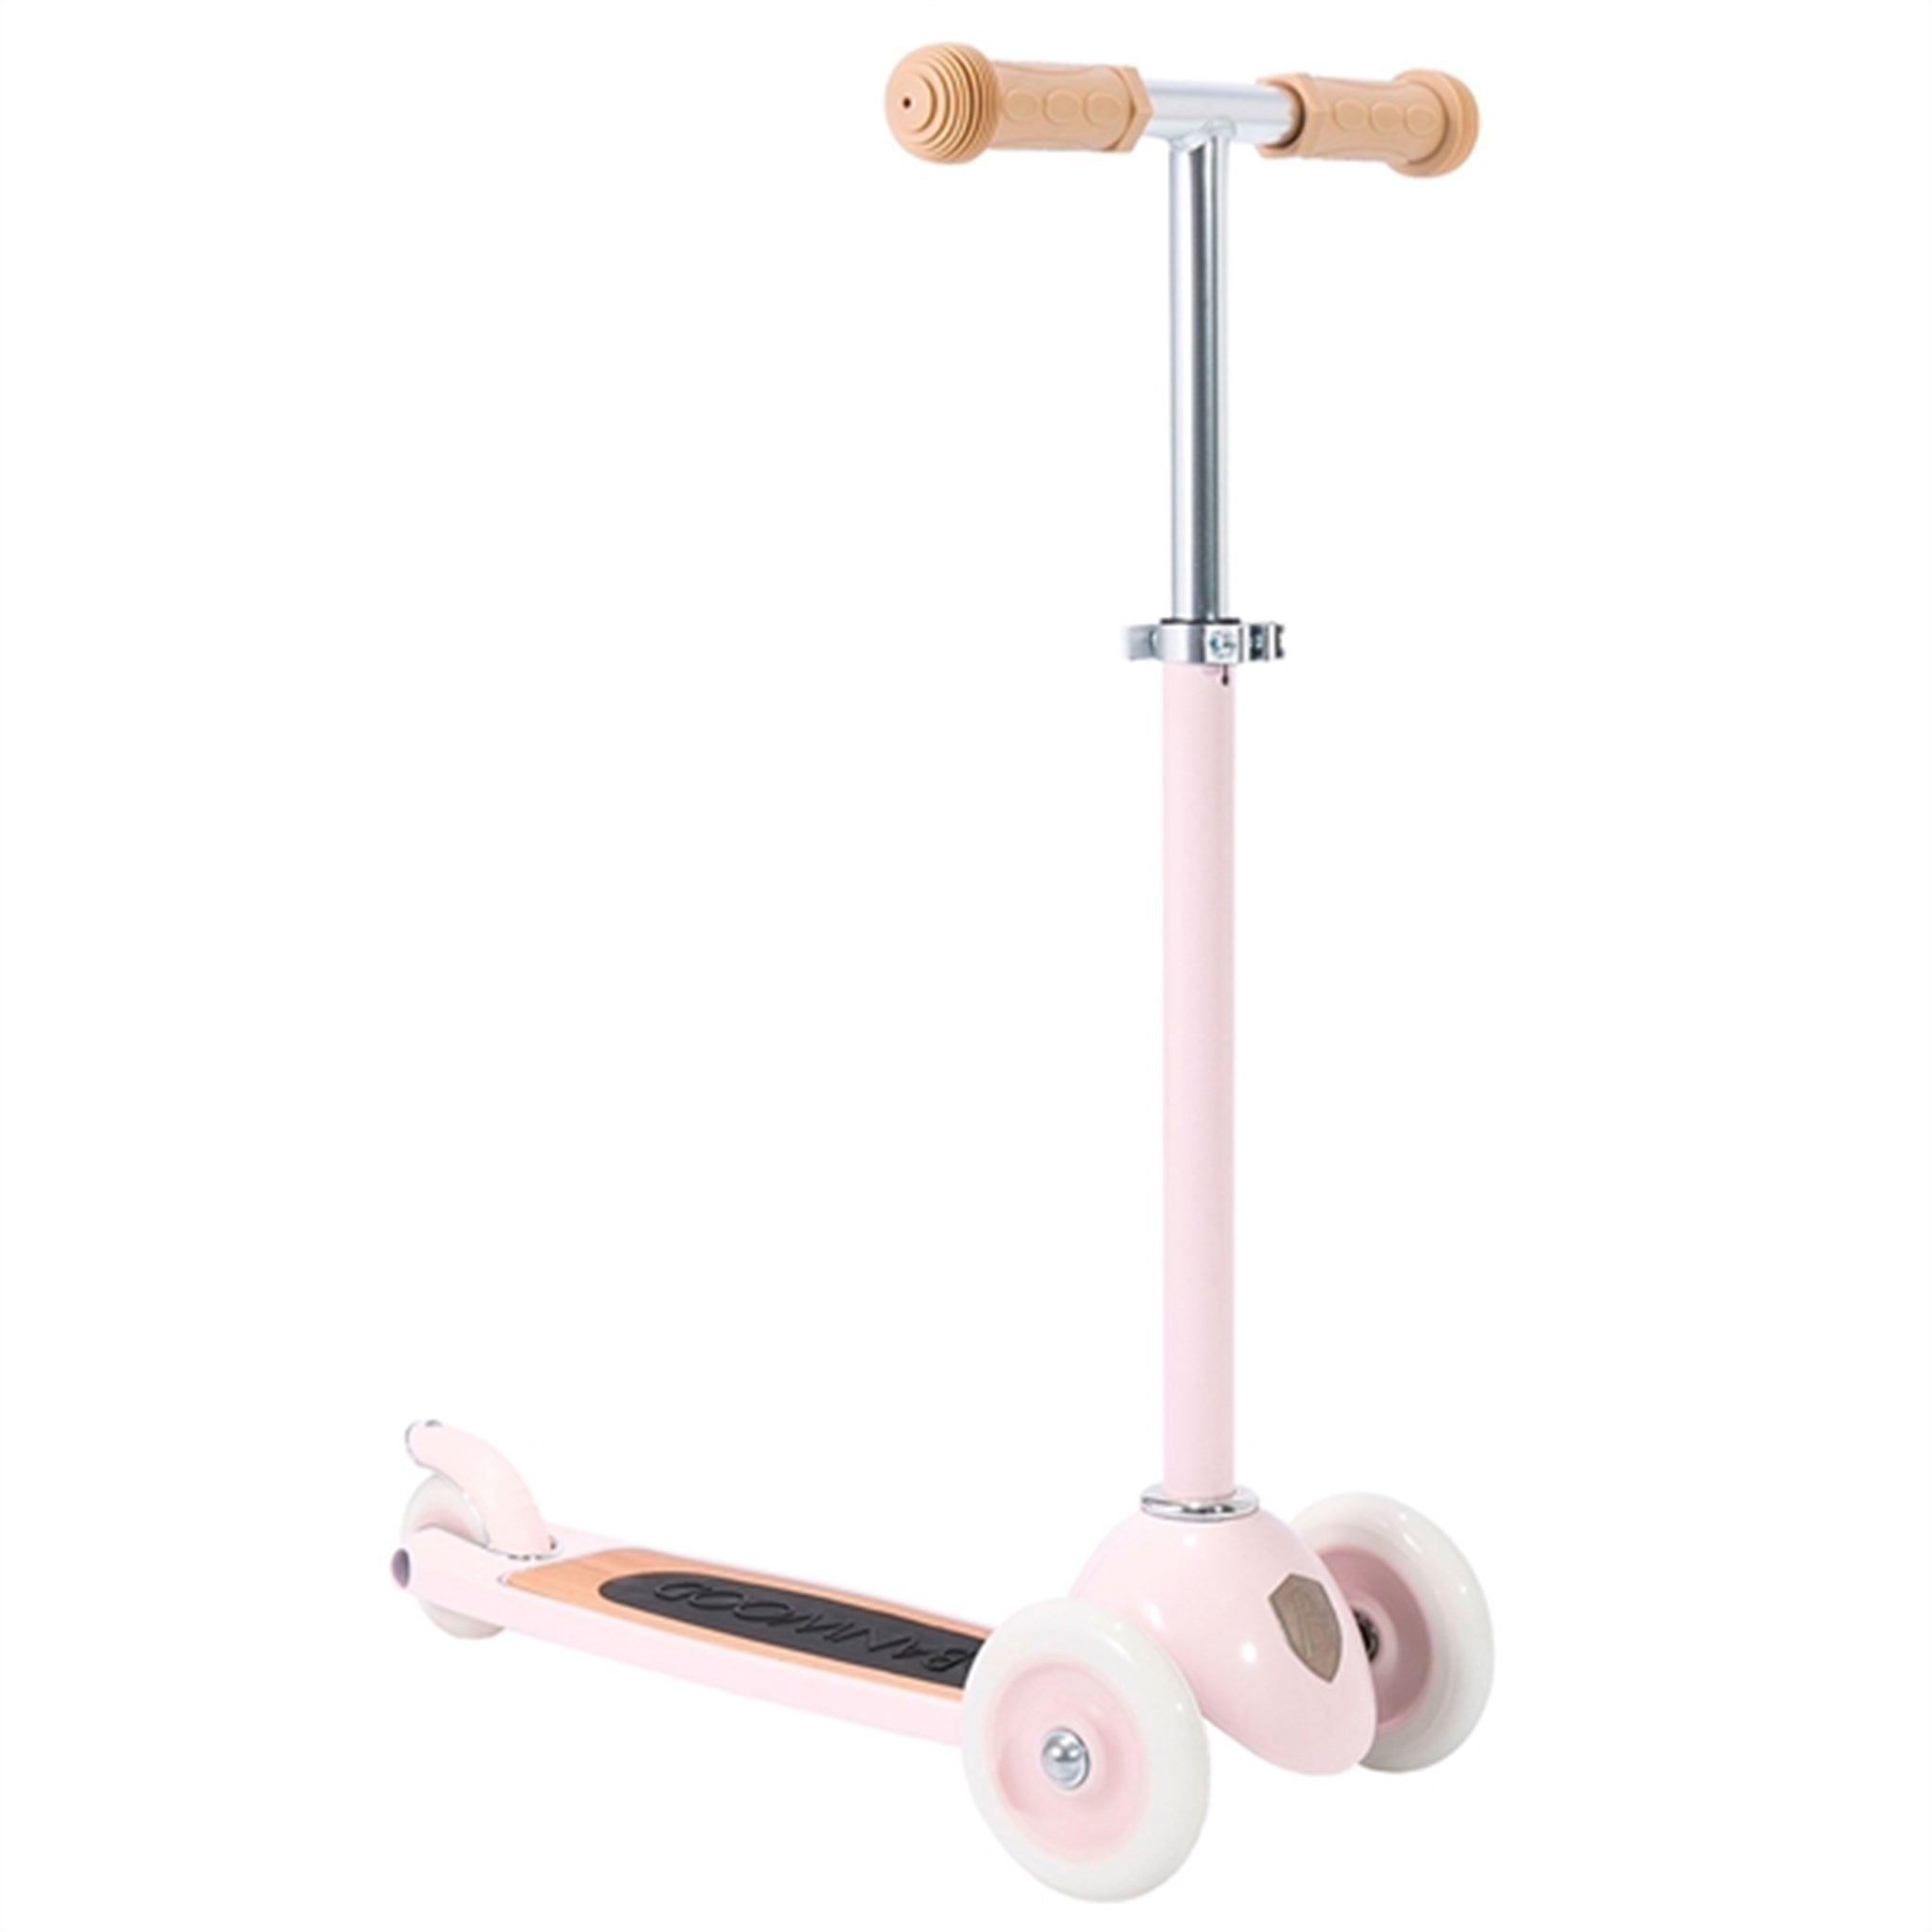 Banwood Scooter Pink 9